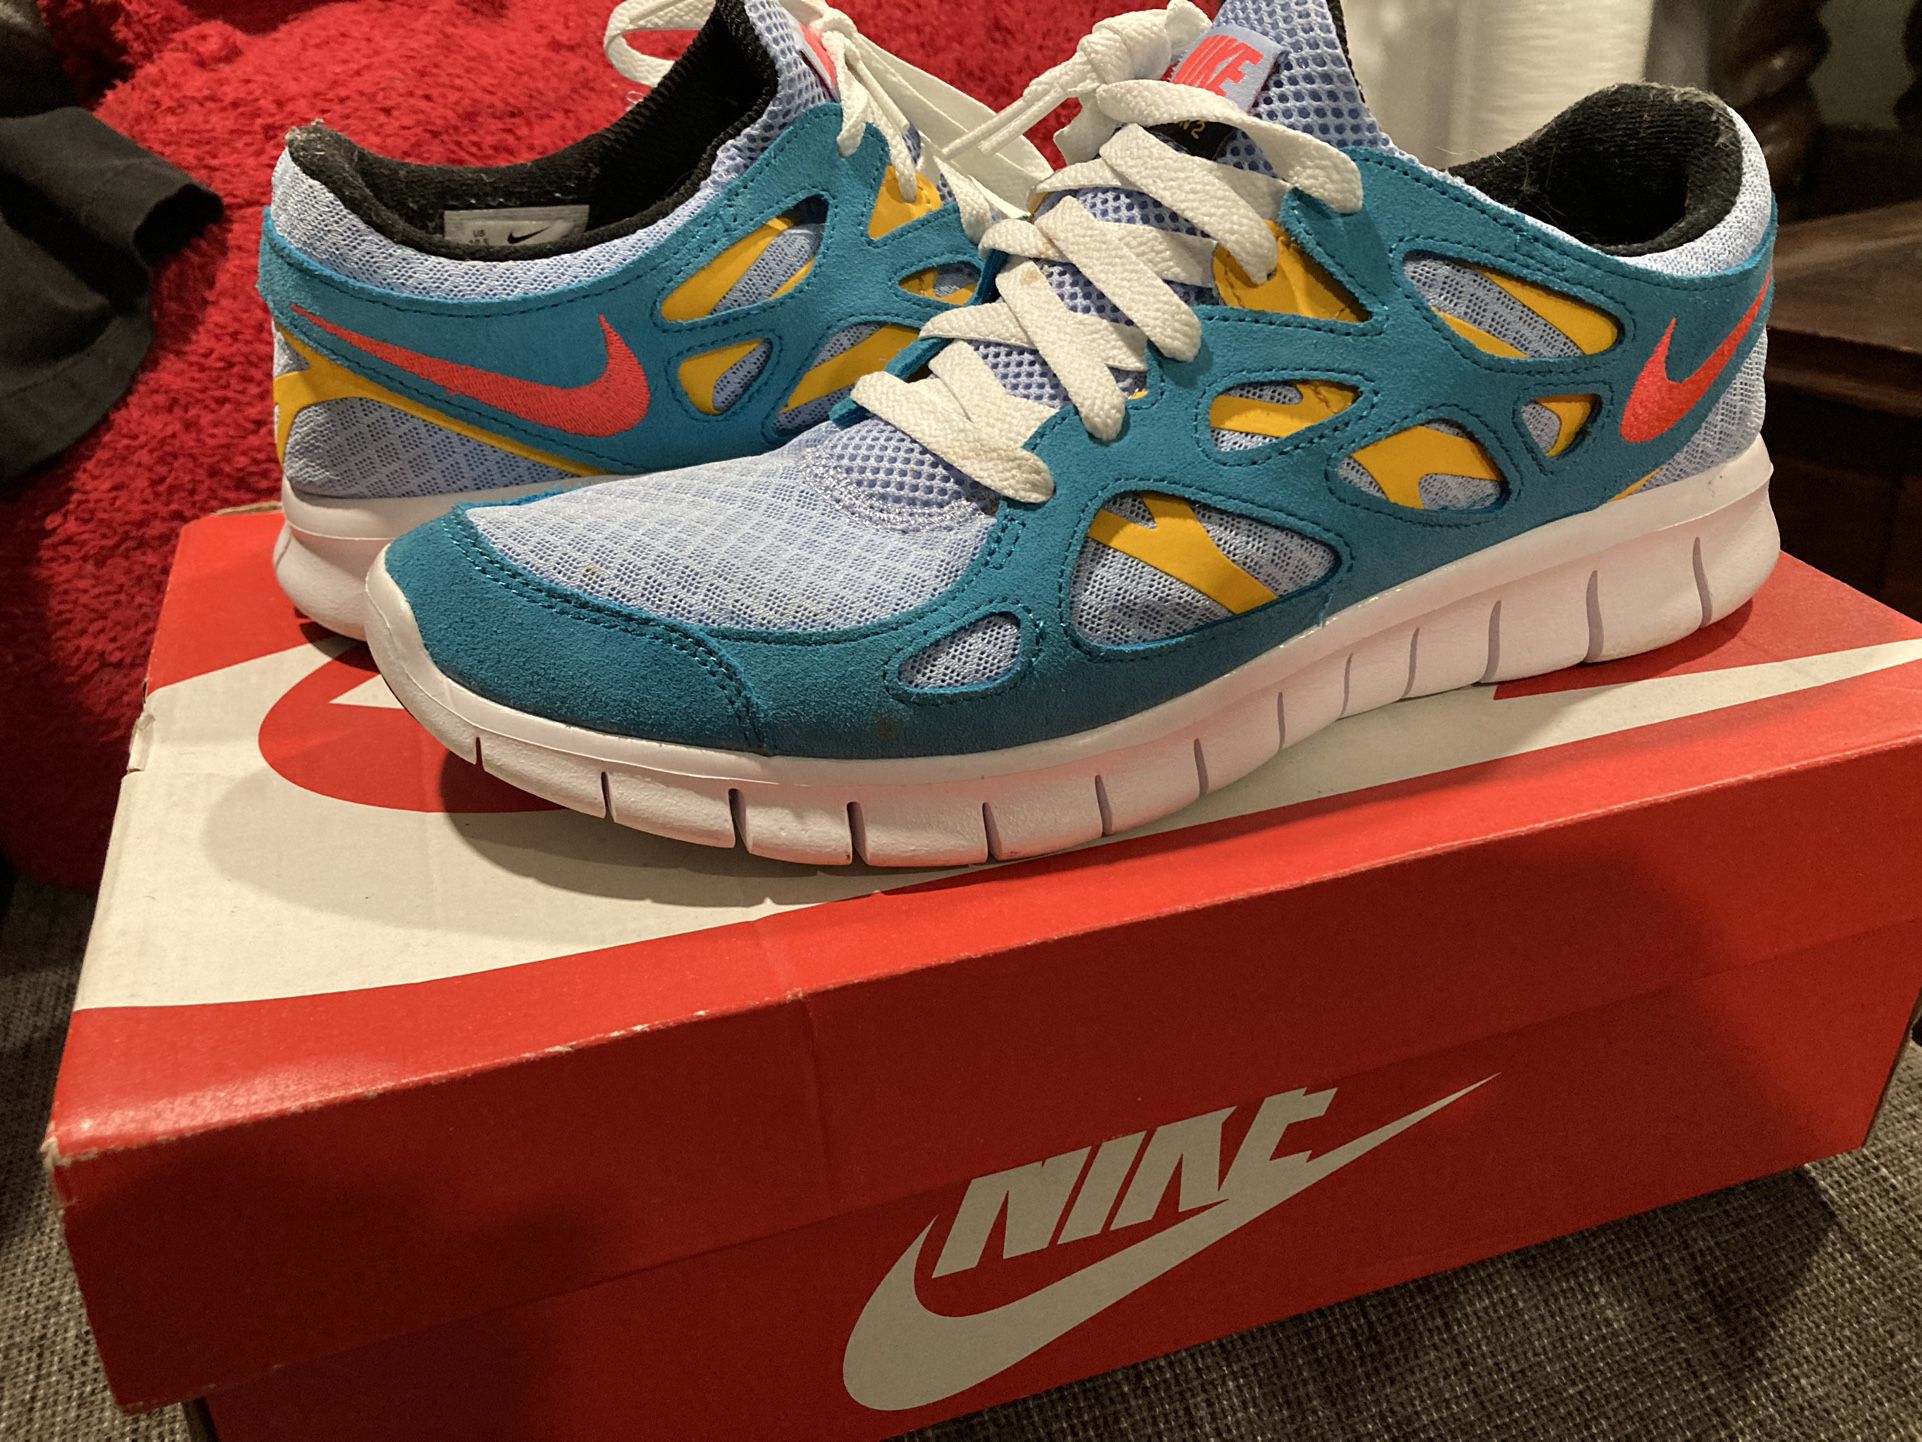 Nike Free Run 2 Size 10.5 Running Shoes Cyber Teal Crimson 537732-405 Mens